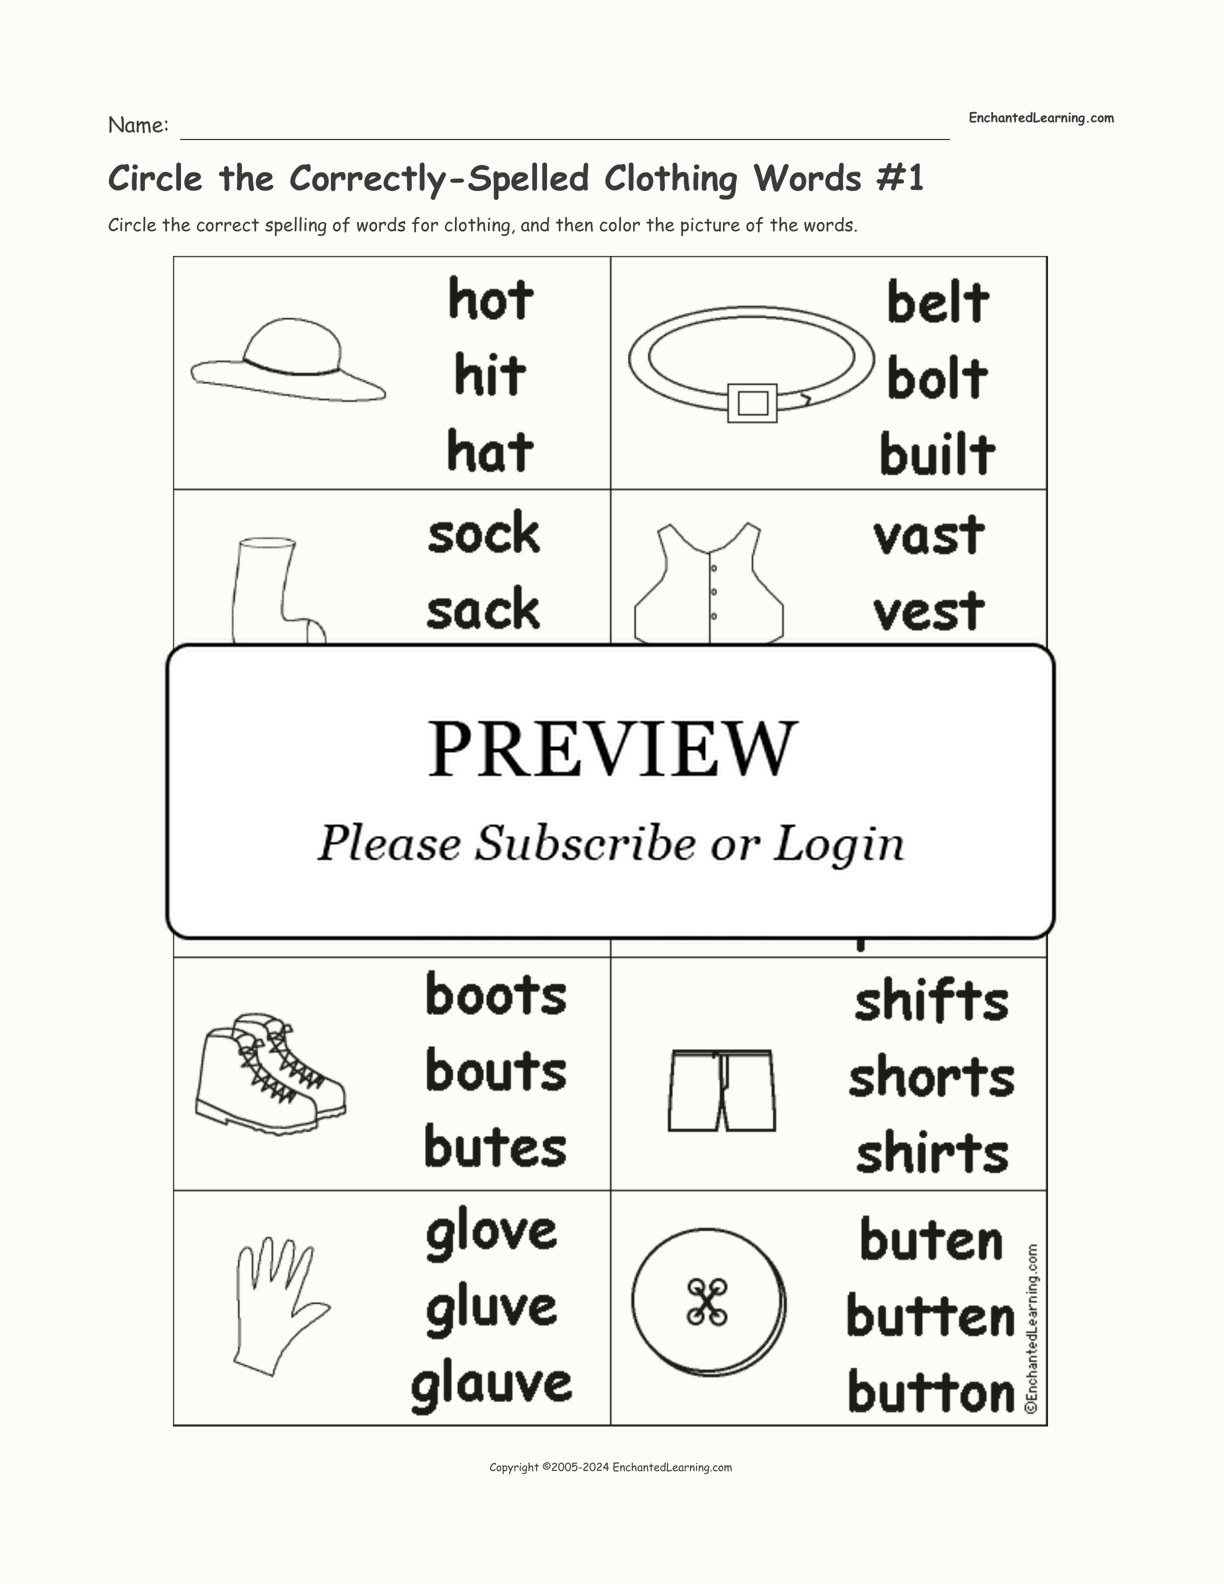 Circle the Correctly-Spelled Clothing Words #1 interactive worksheet page 1